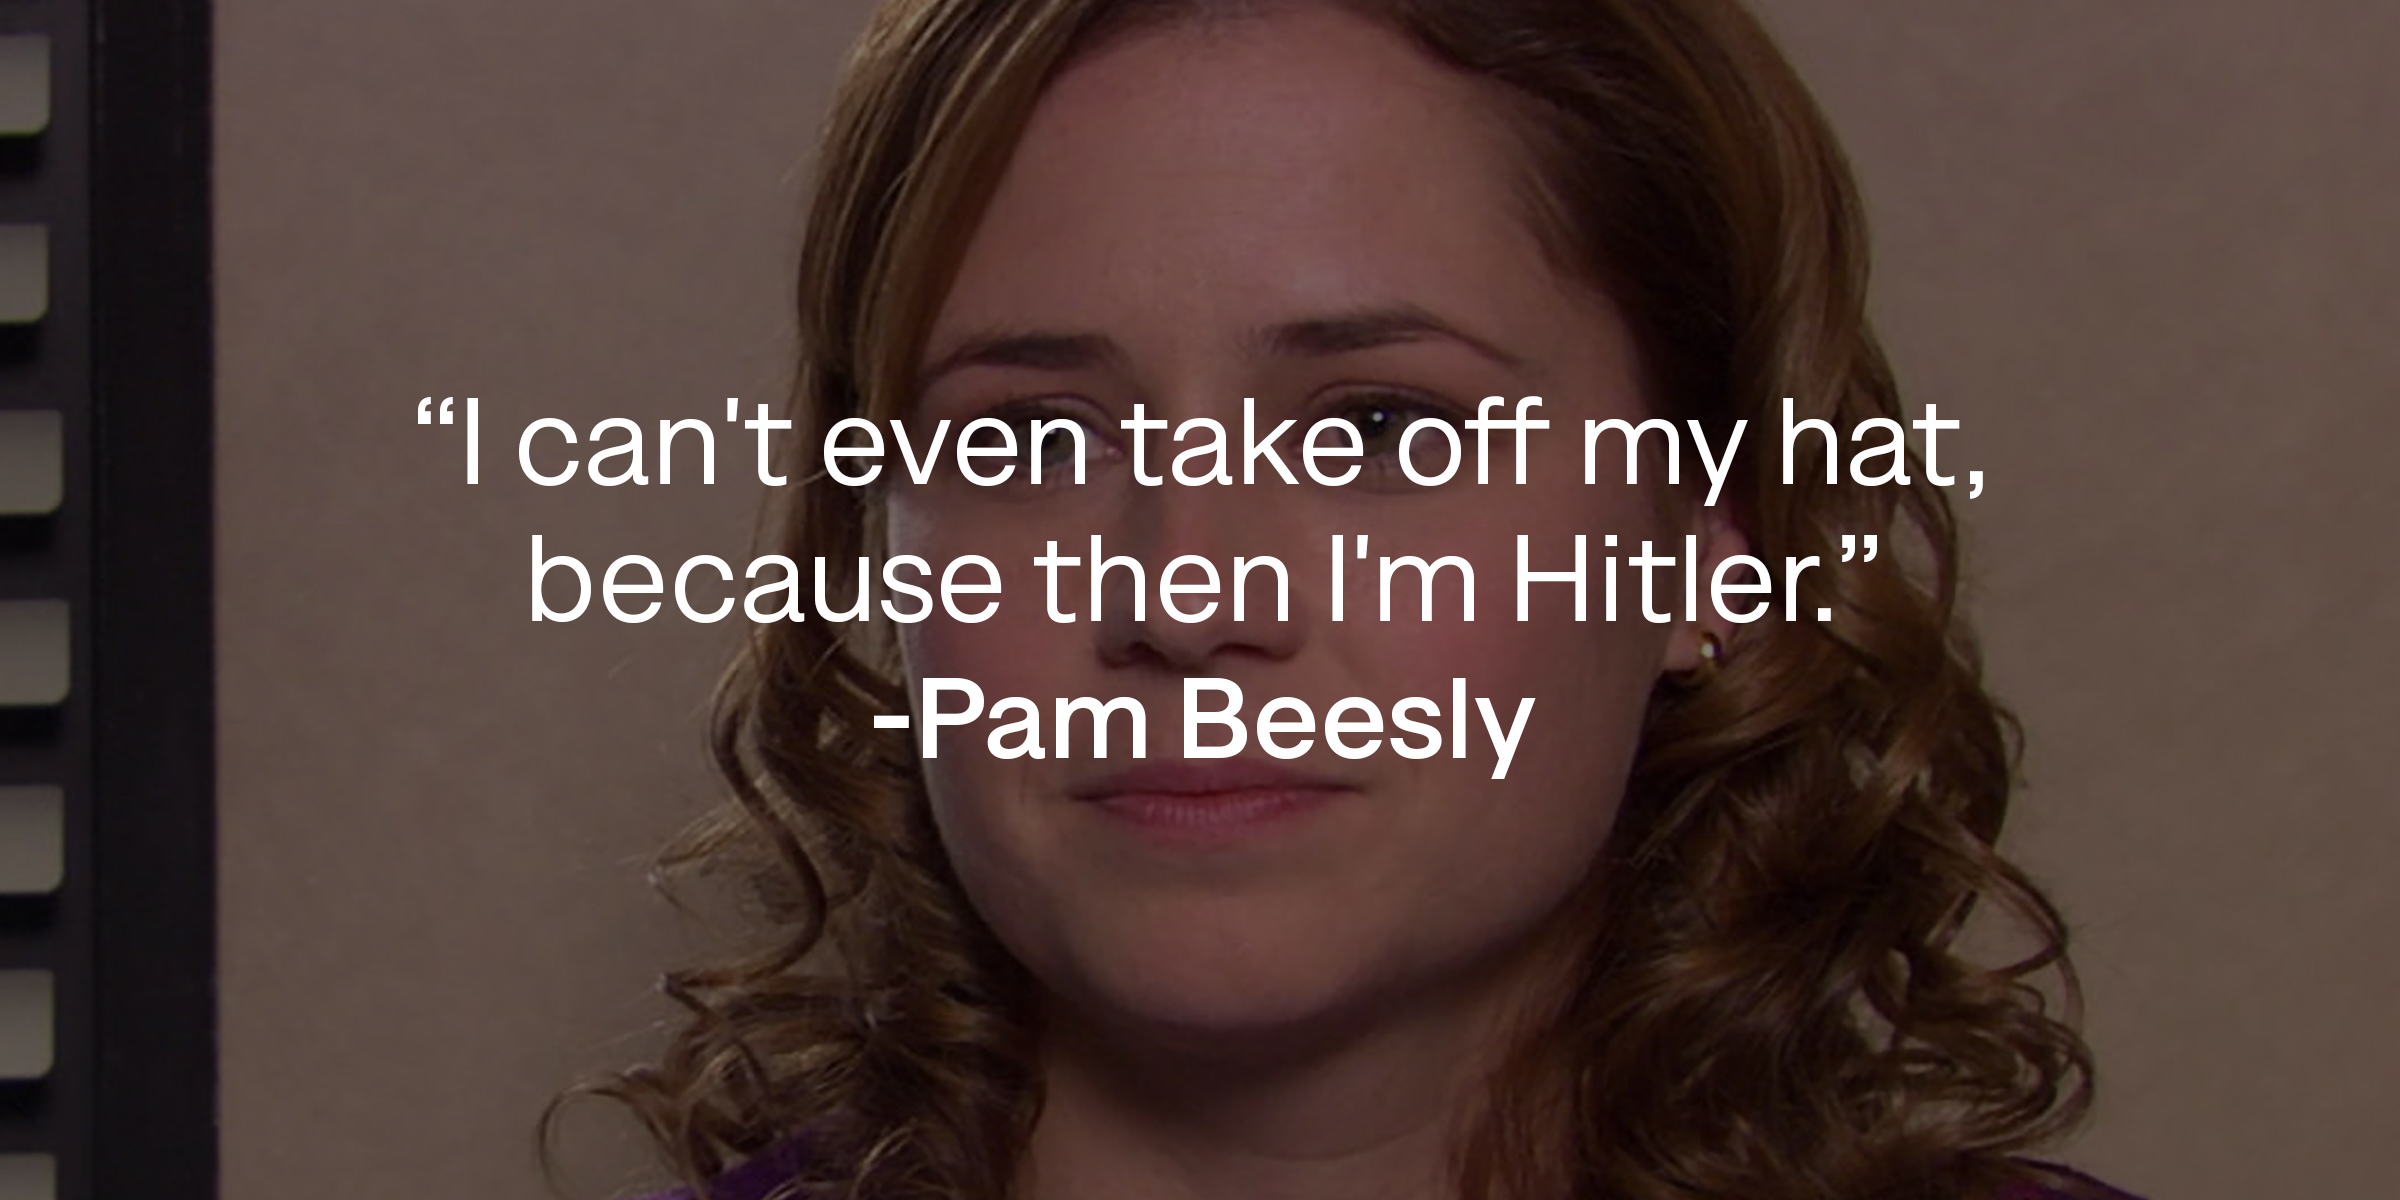 Pam Beesly's quote, "I can't even take off my hat, because then I'm Hitler." | Source: Facebook/TheOfficeTV